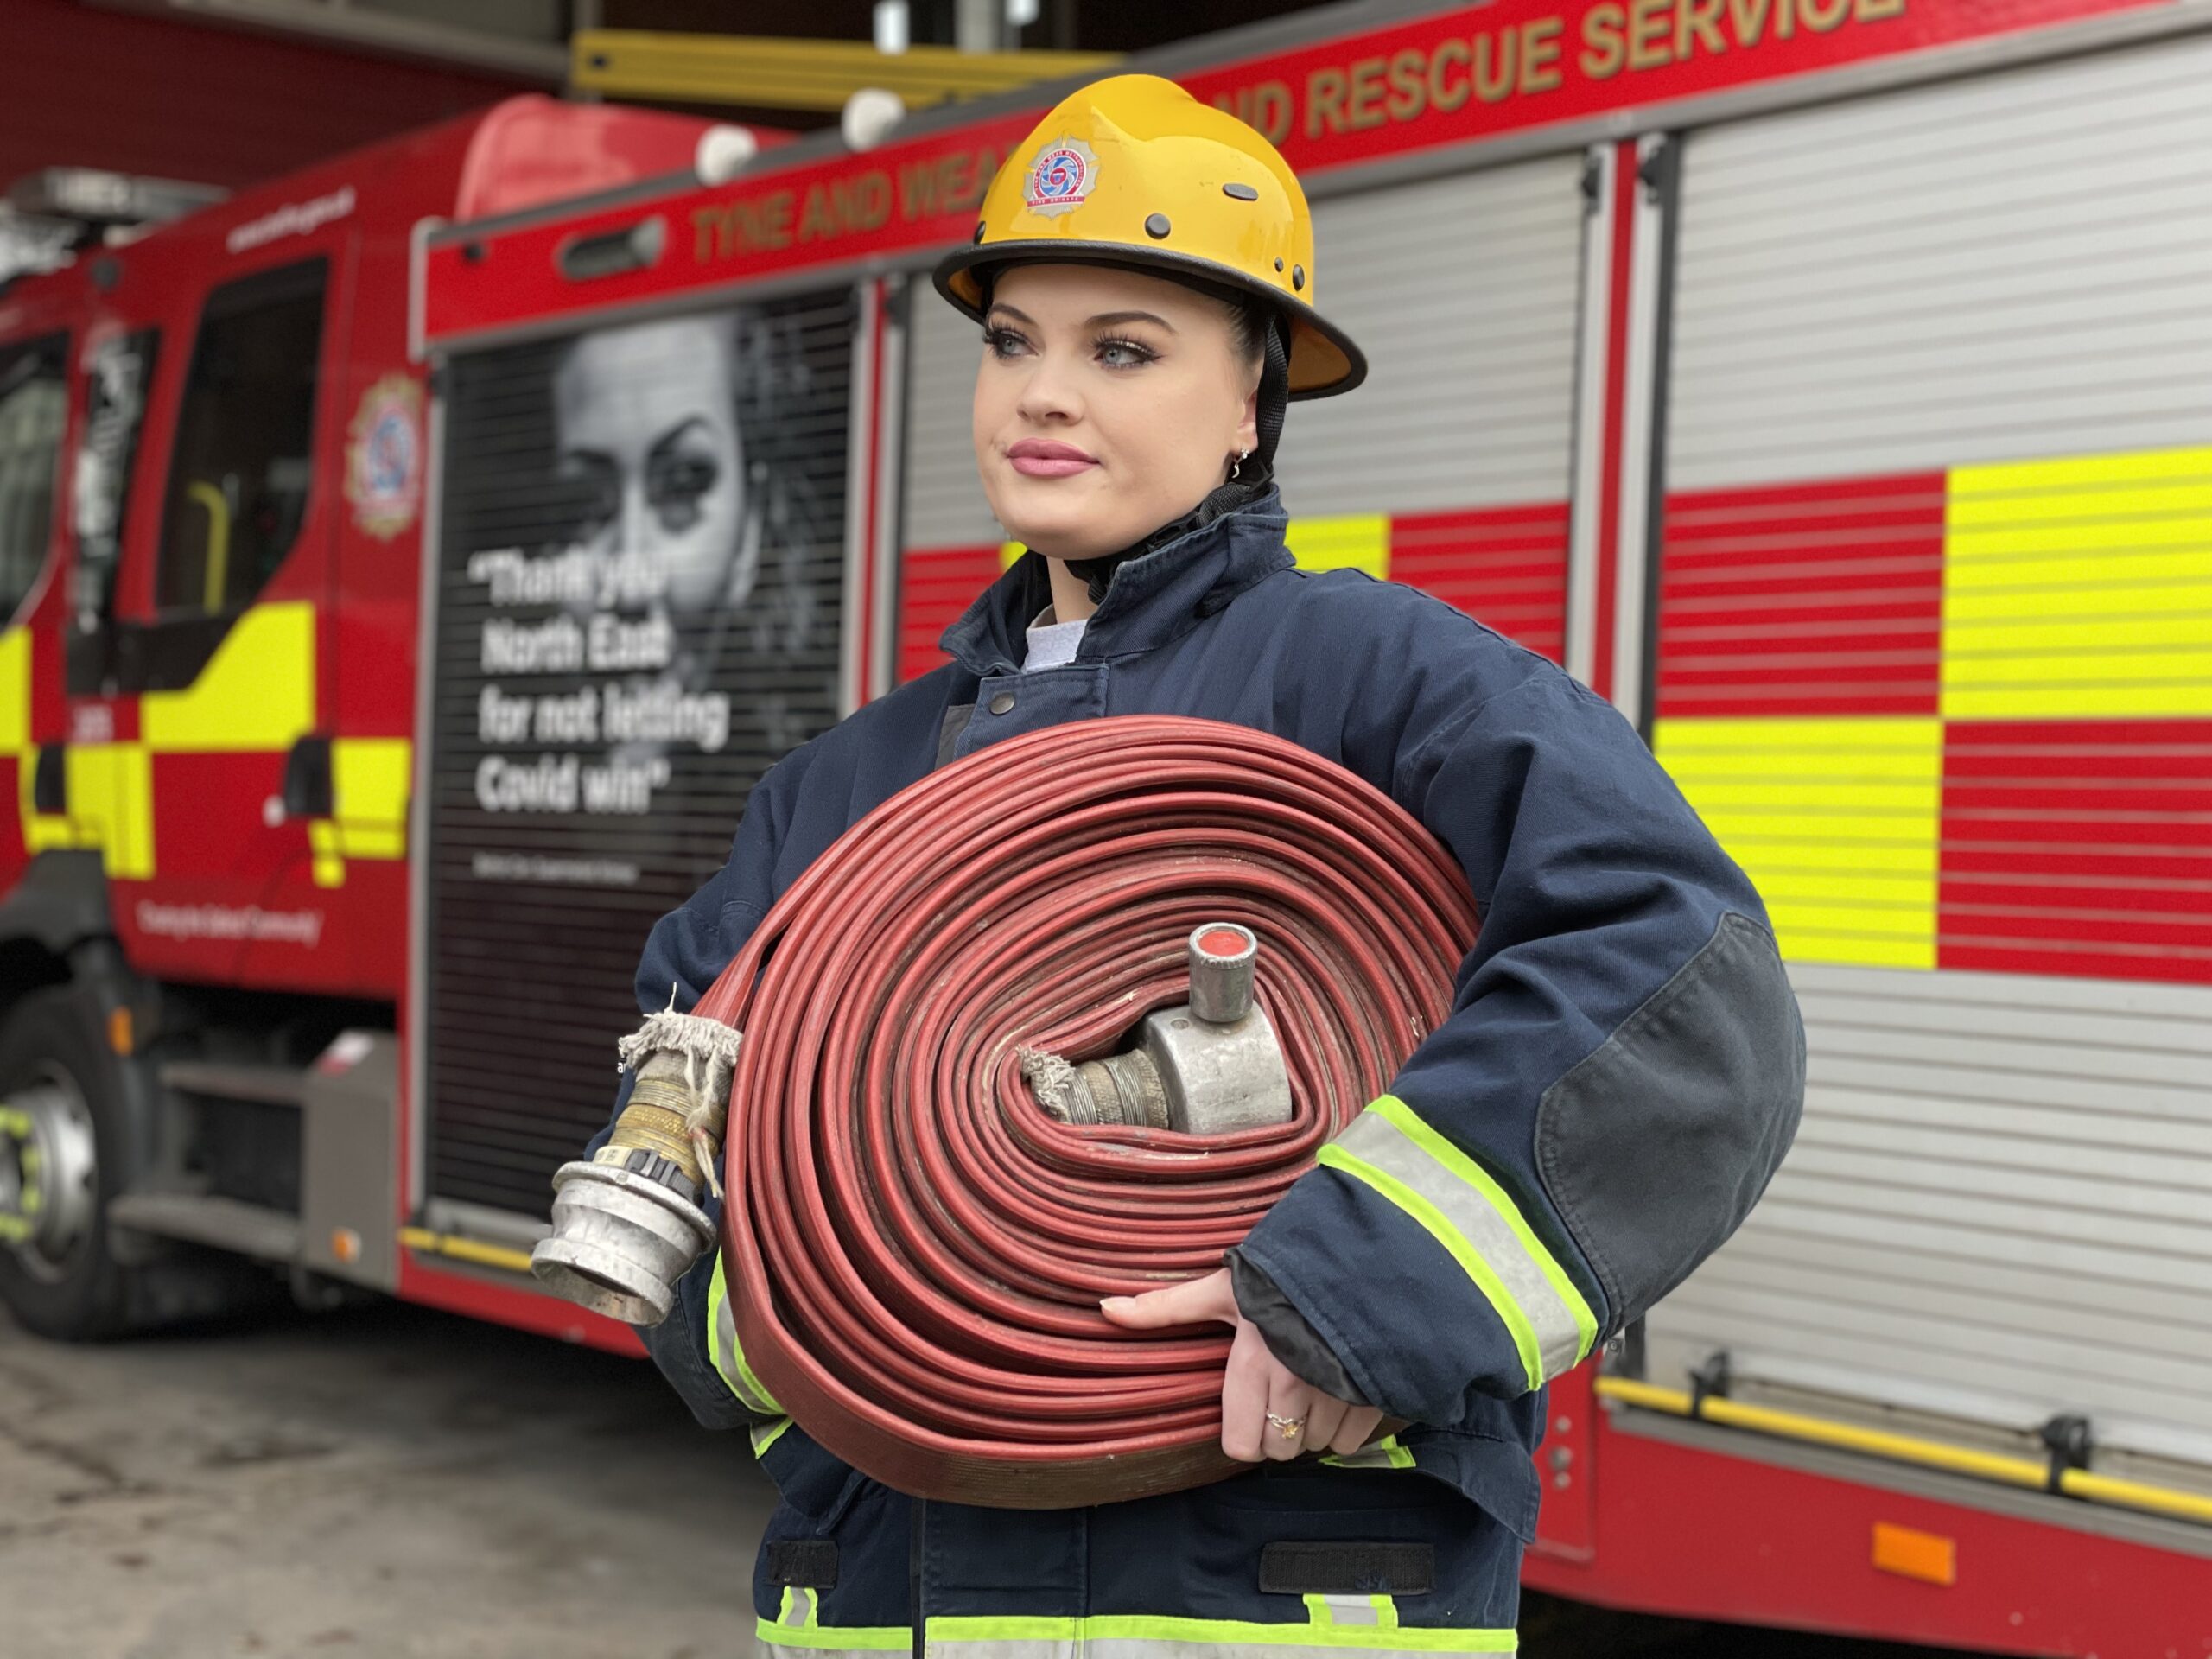 Charlotte Narey taking part in The Prince’s Trust course (Team) being delivered by Tyne and Wear Fire and Rescue Service (TWFRS).